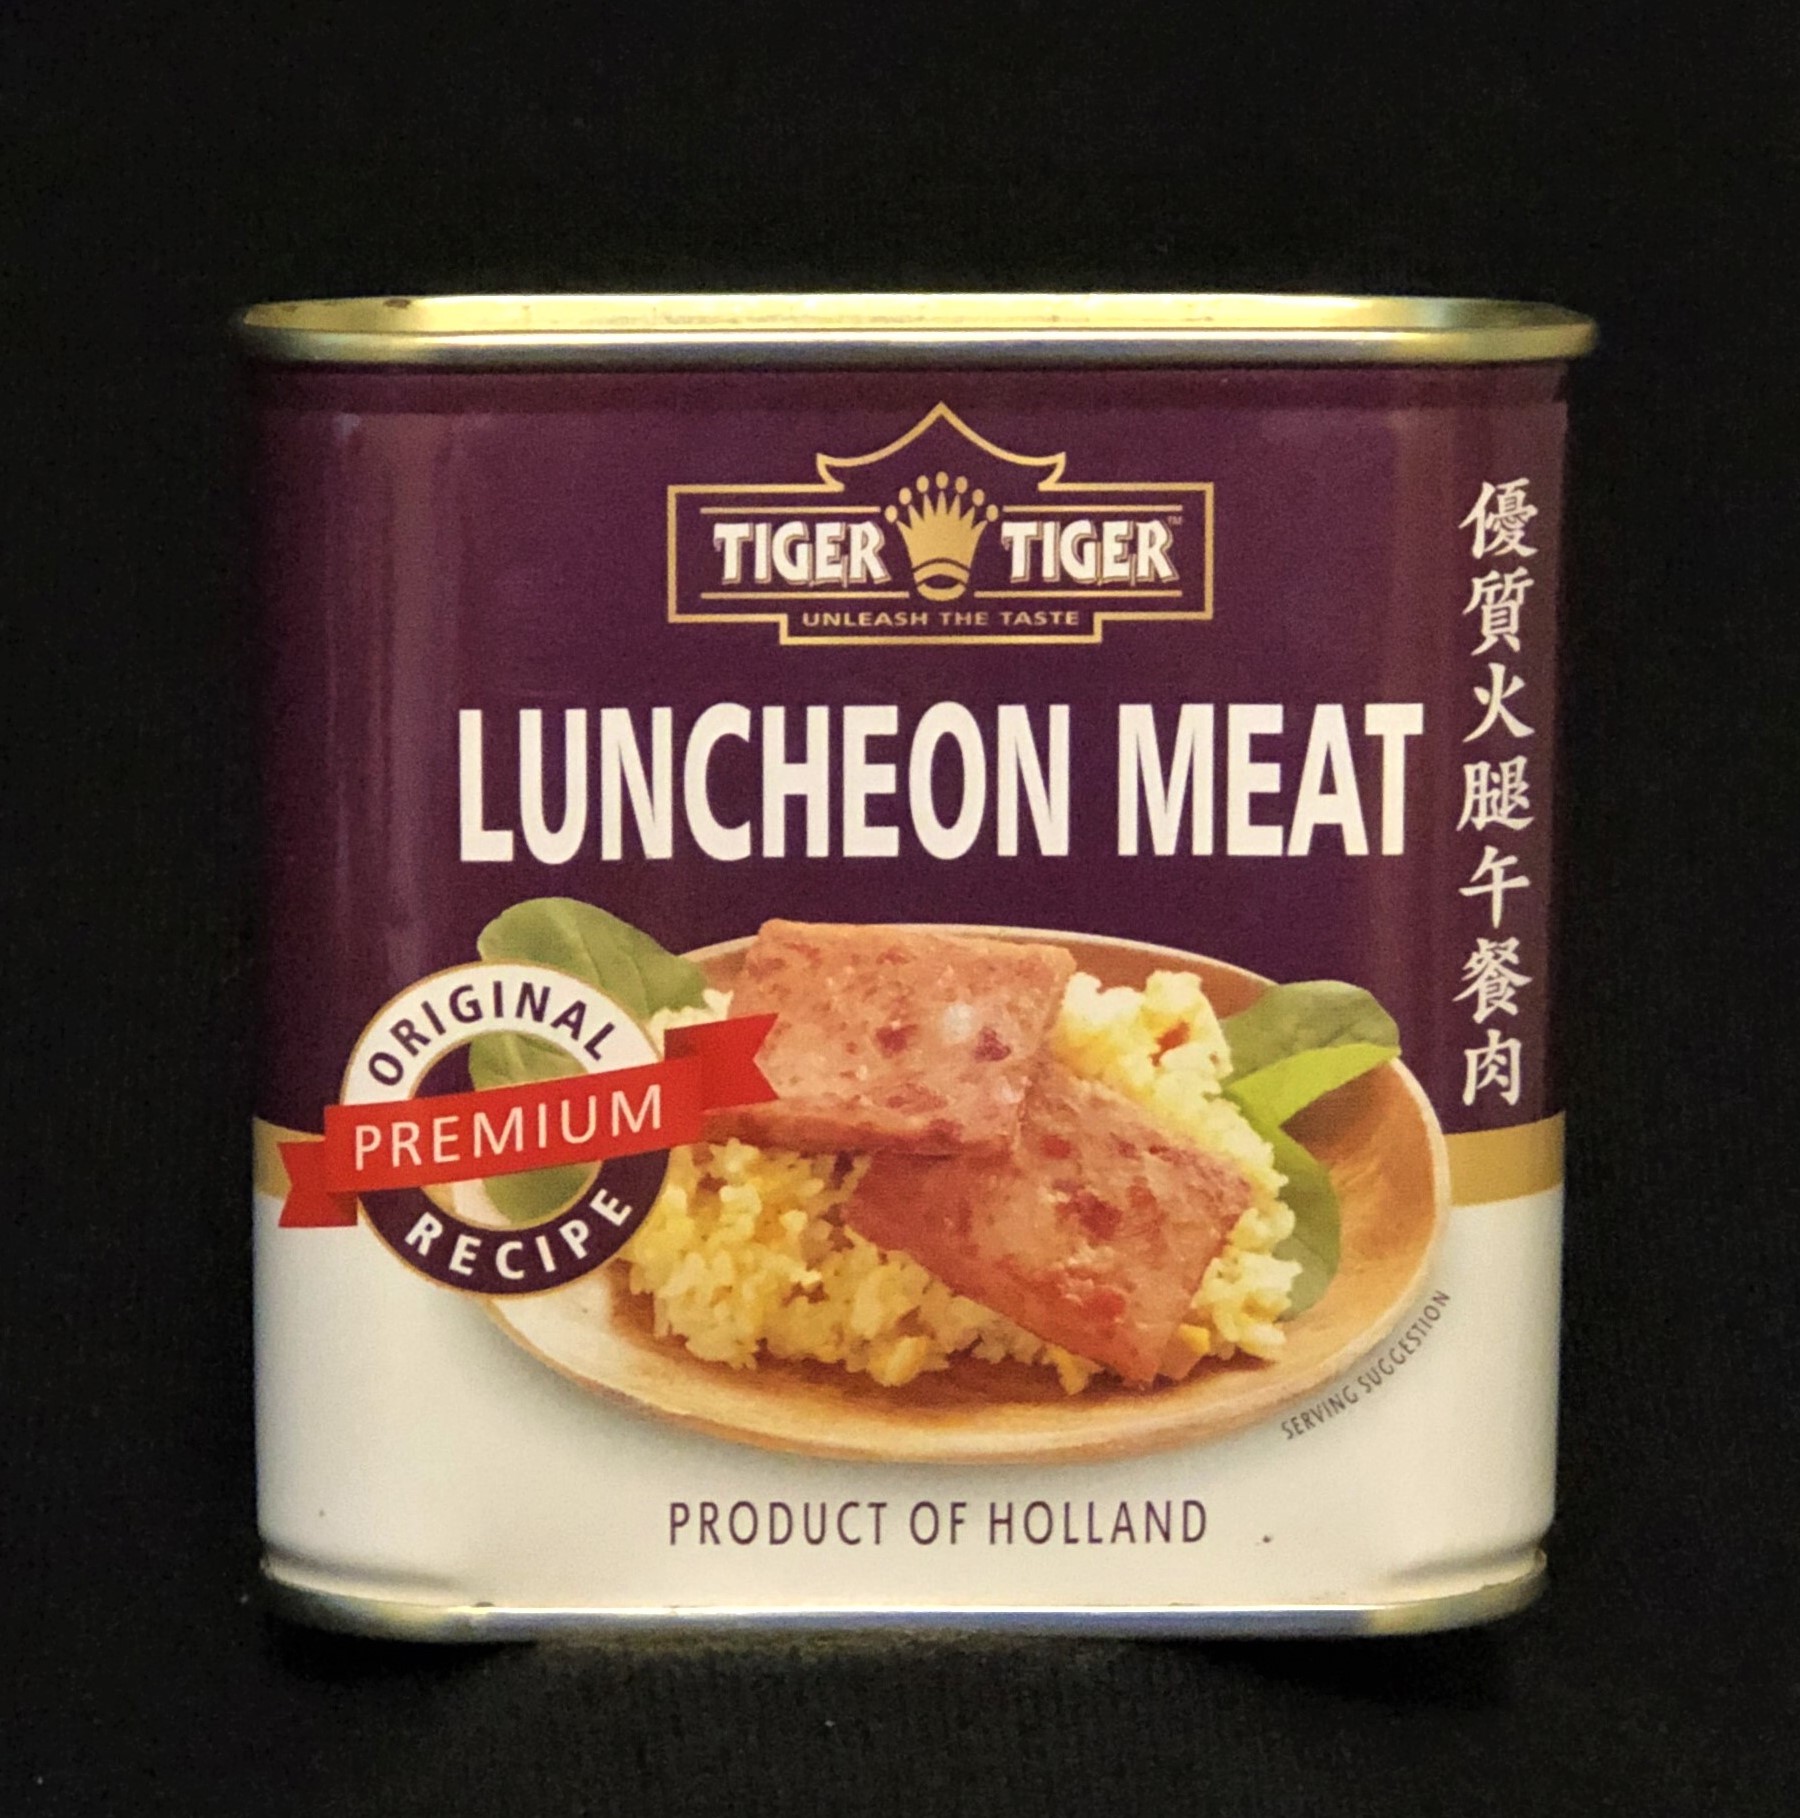 Tiger Tiger launches new premium quality luncheon meat